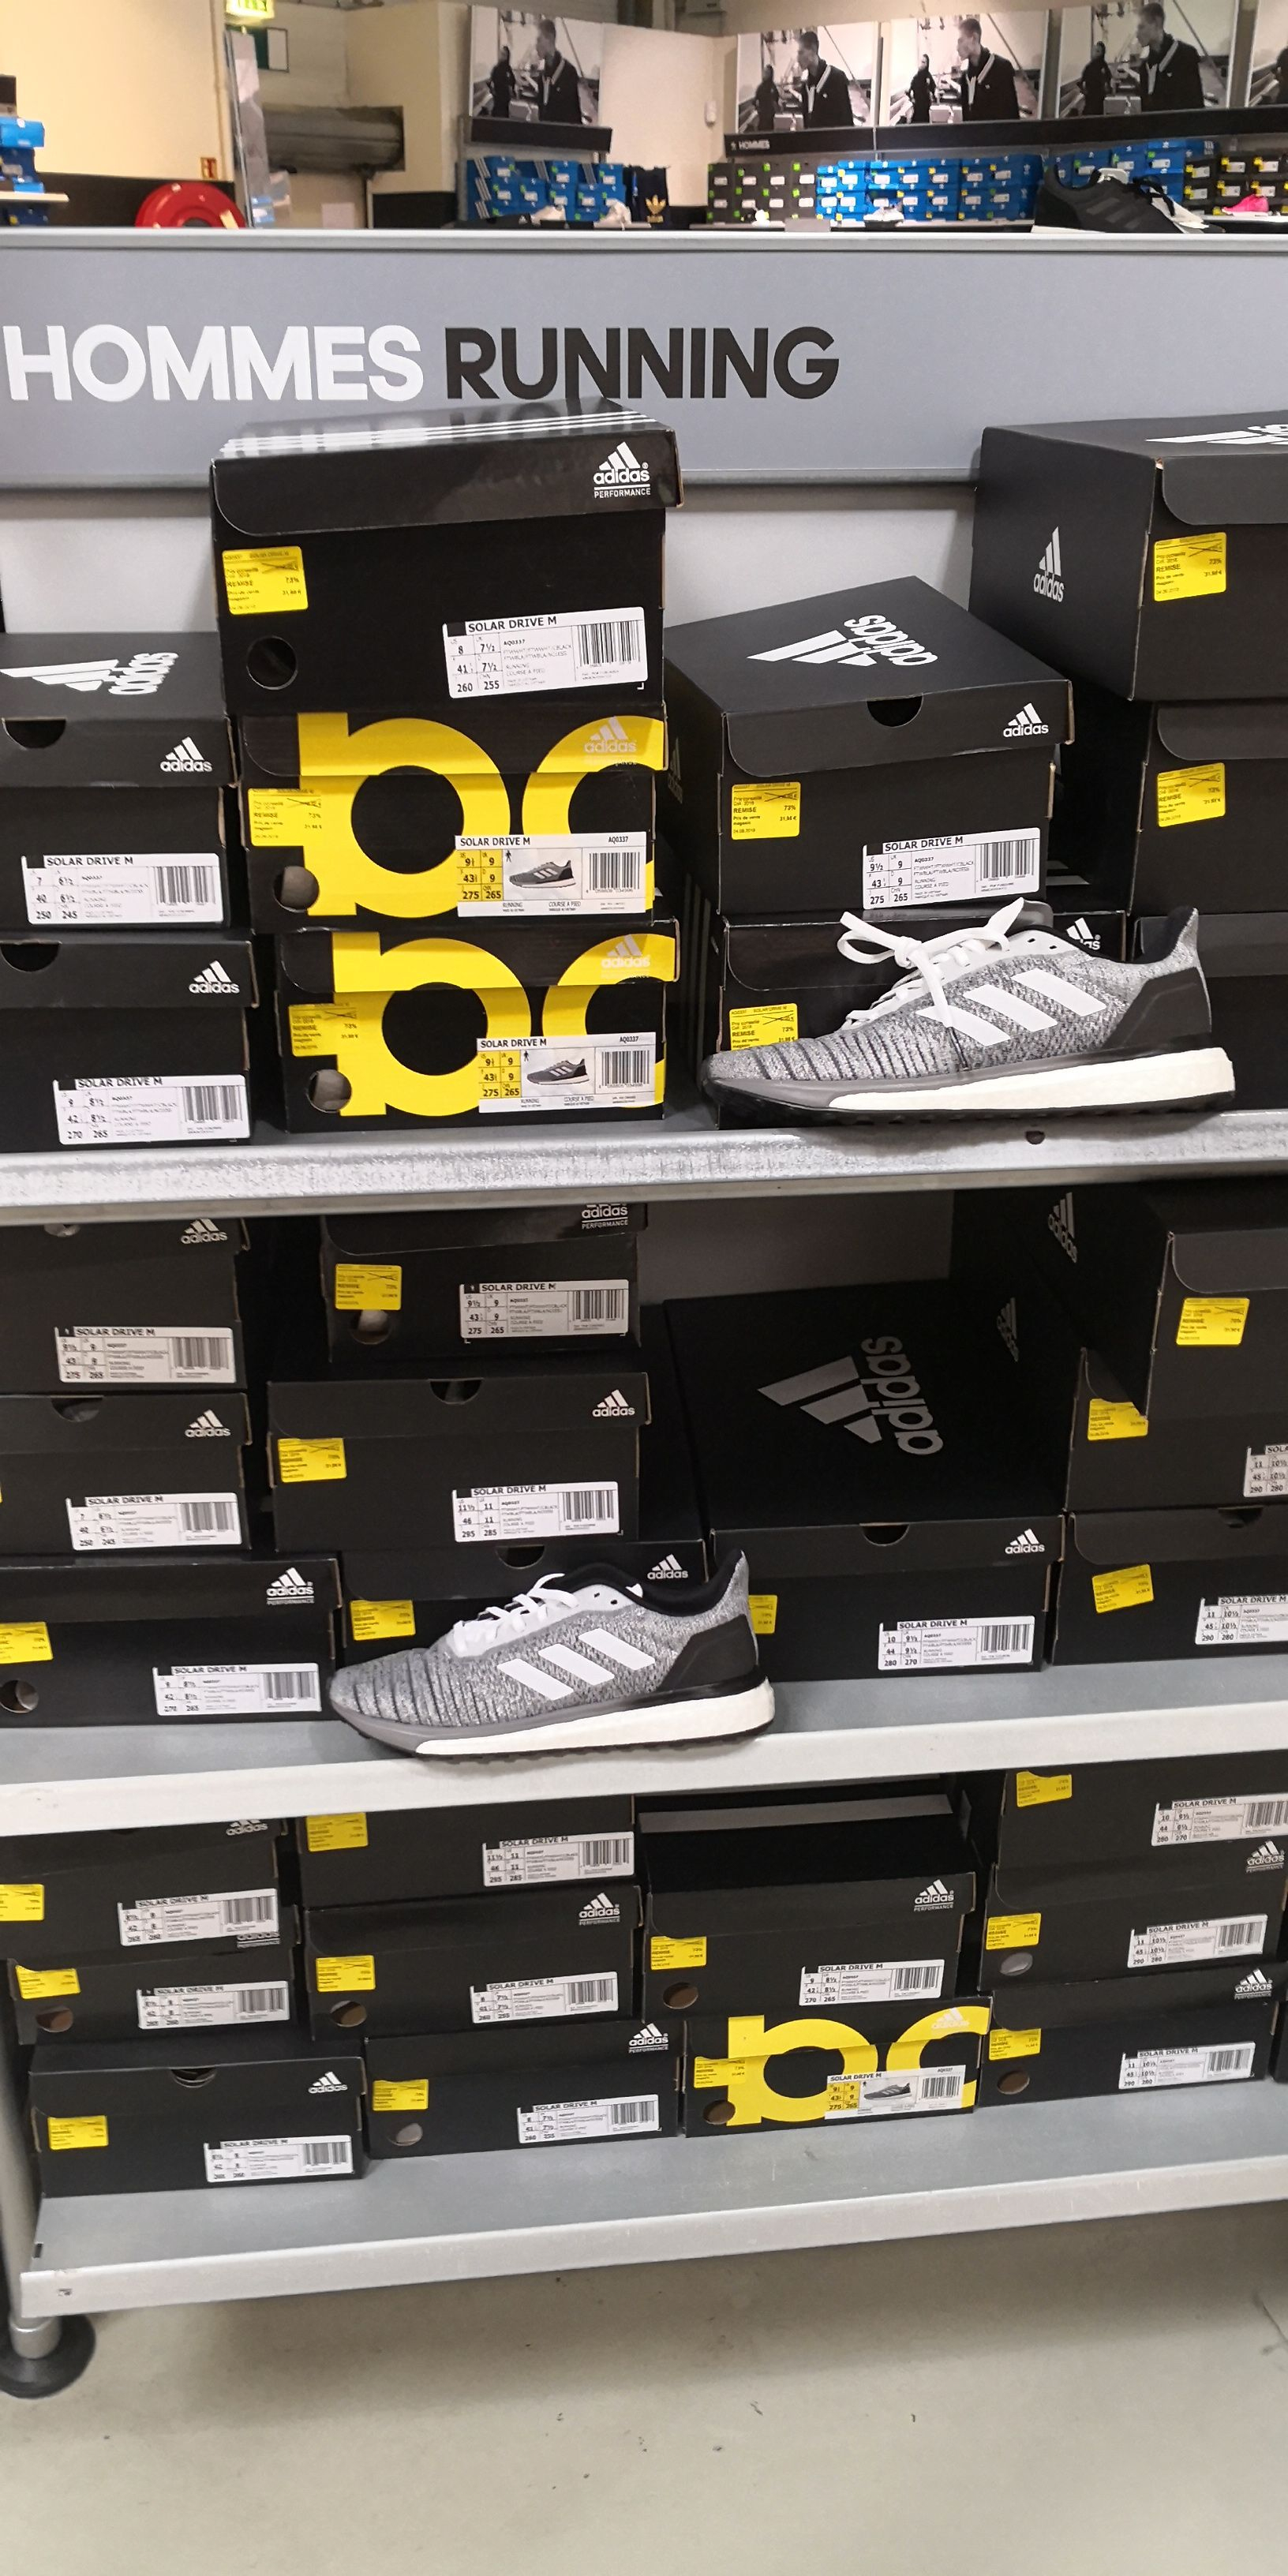 adidas outlet claye souilly horaire